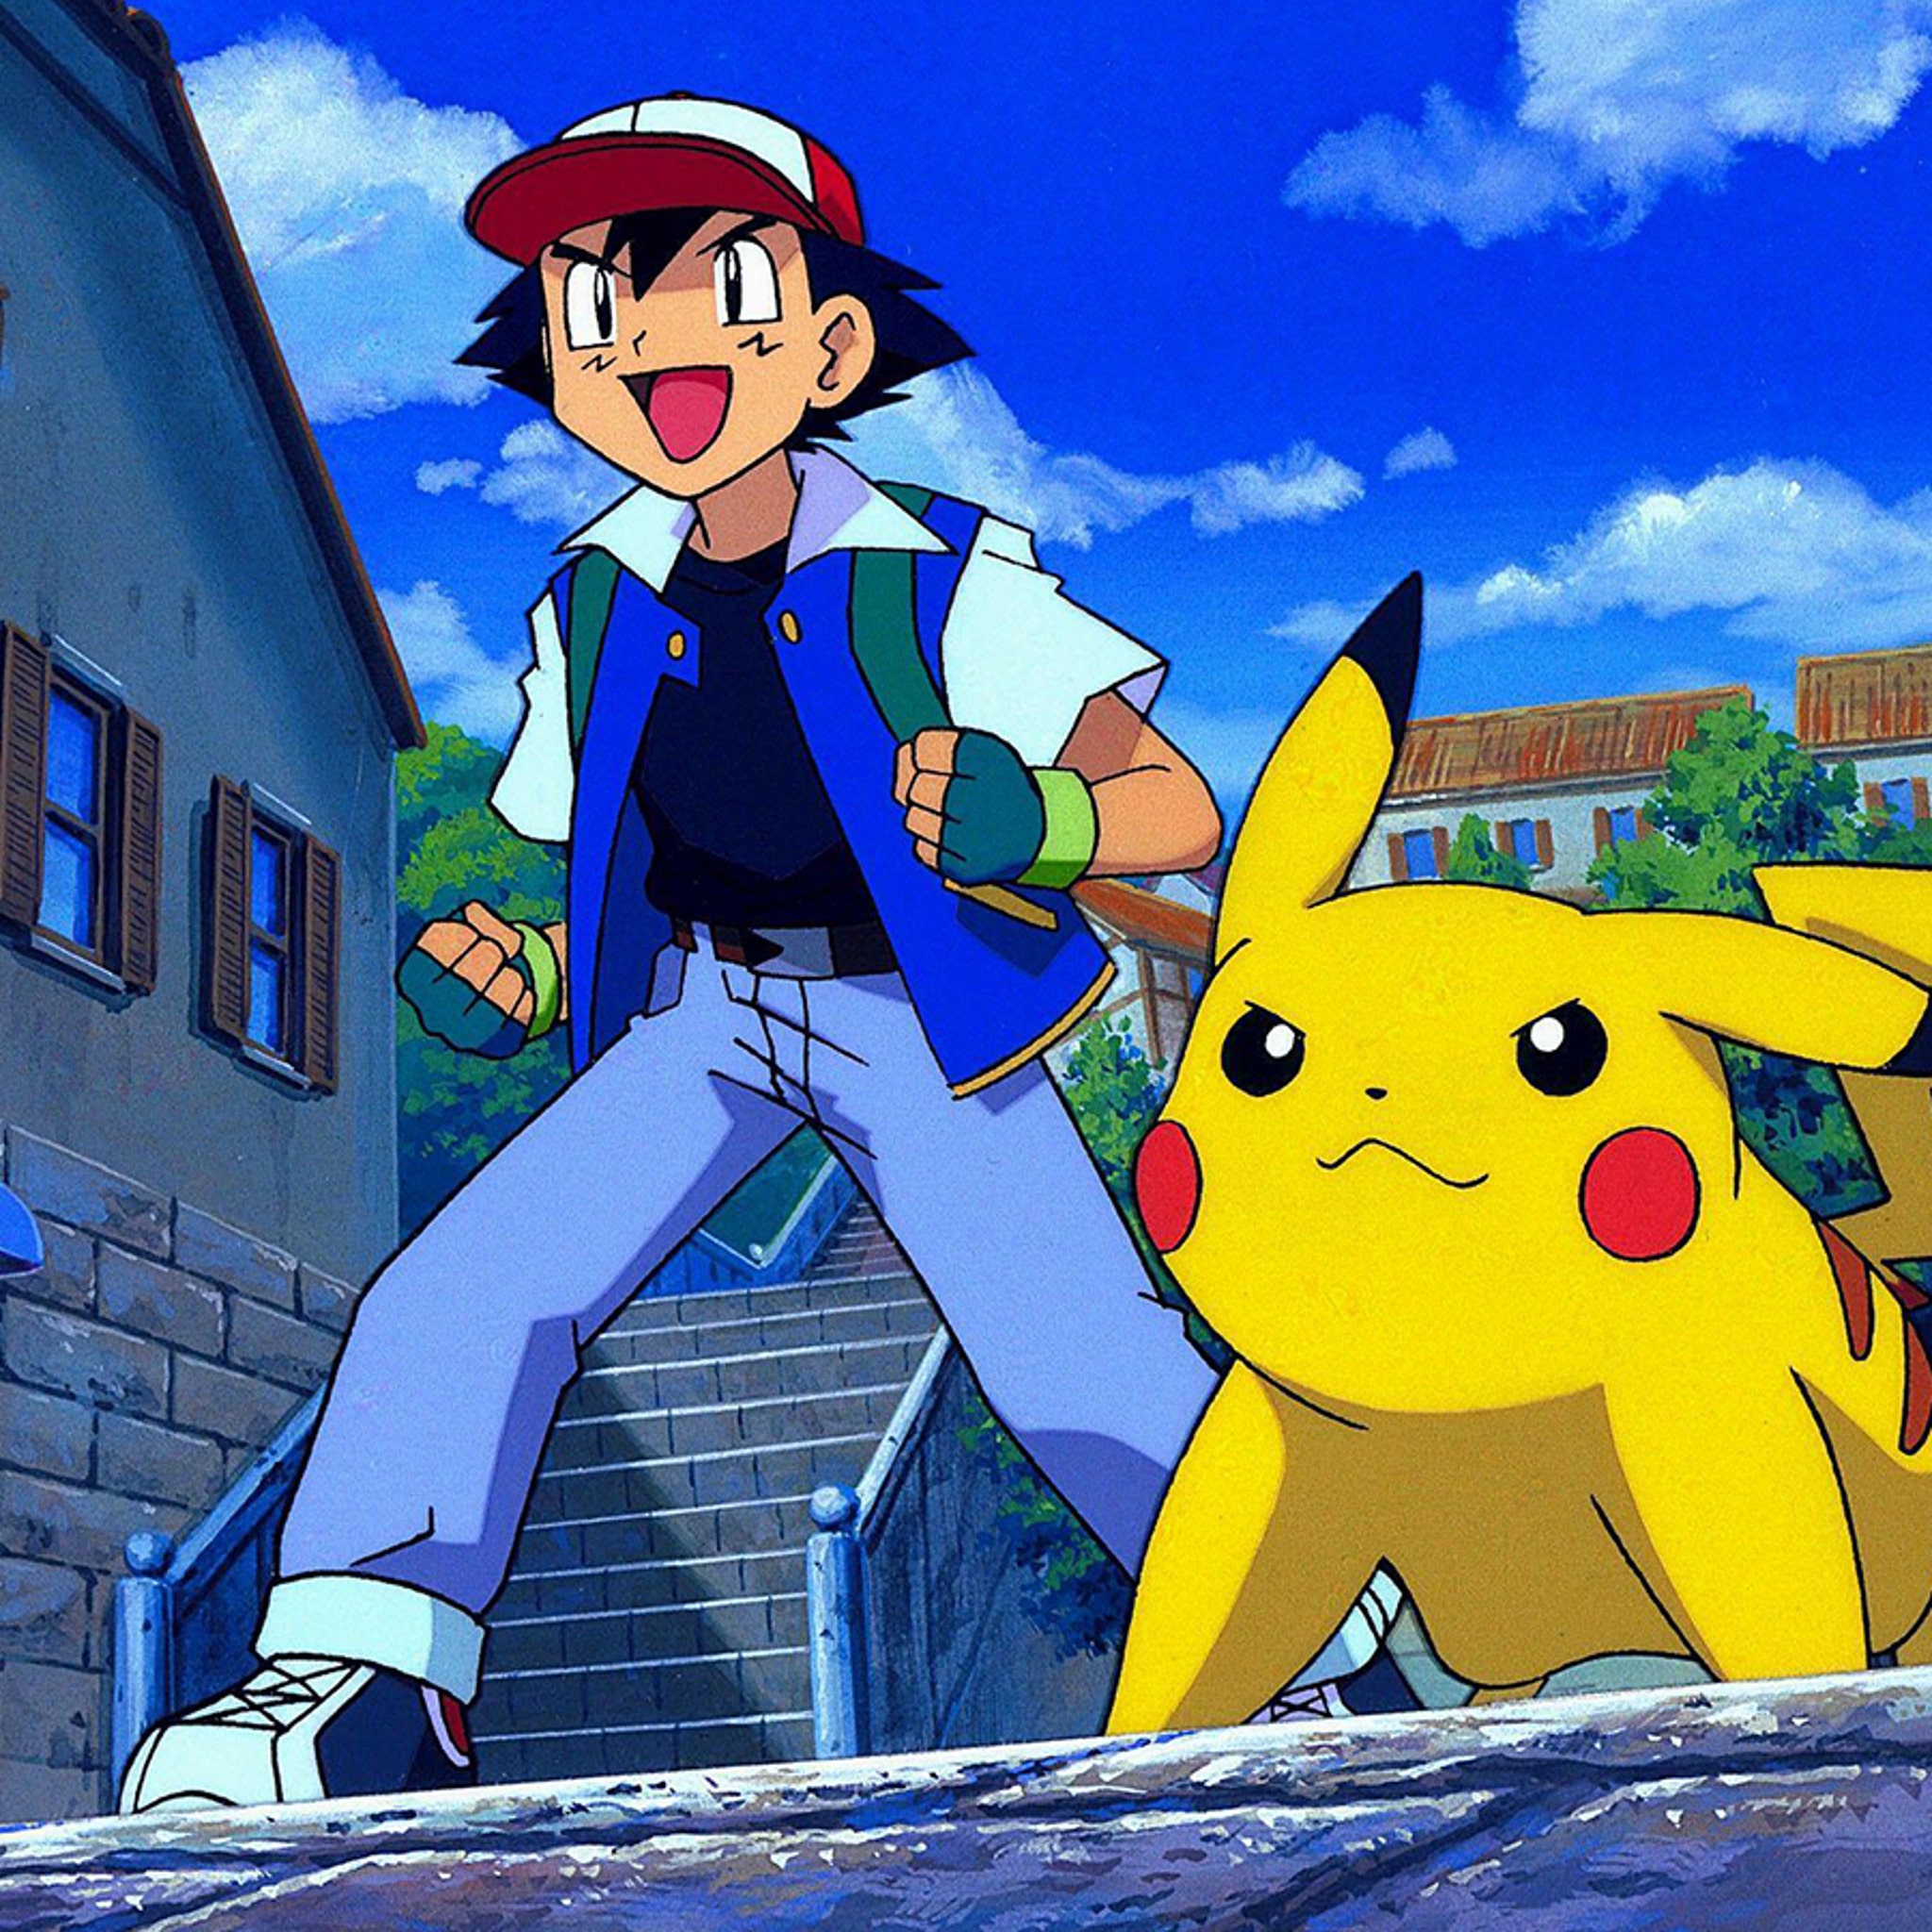 Original Voice Of 'Pokemon'S Ash, Veronica Taylor, 'Hit Hard' By Exit News